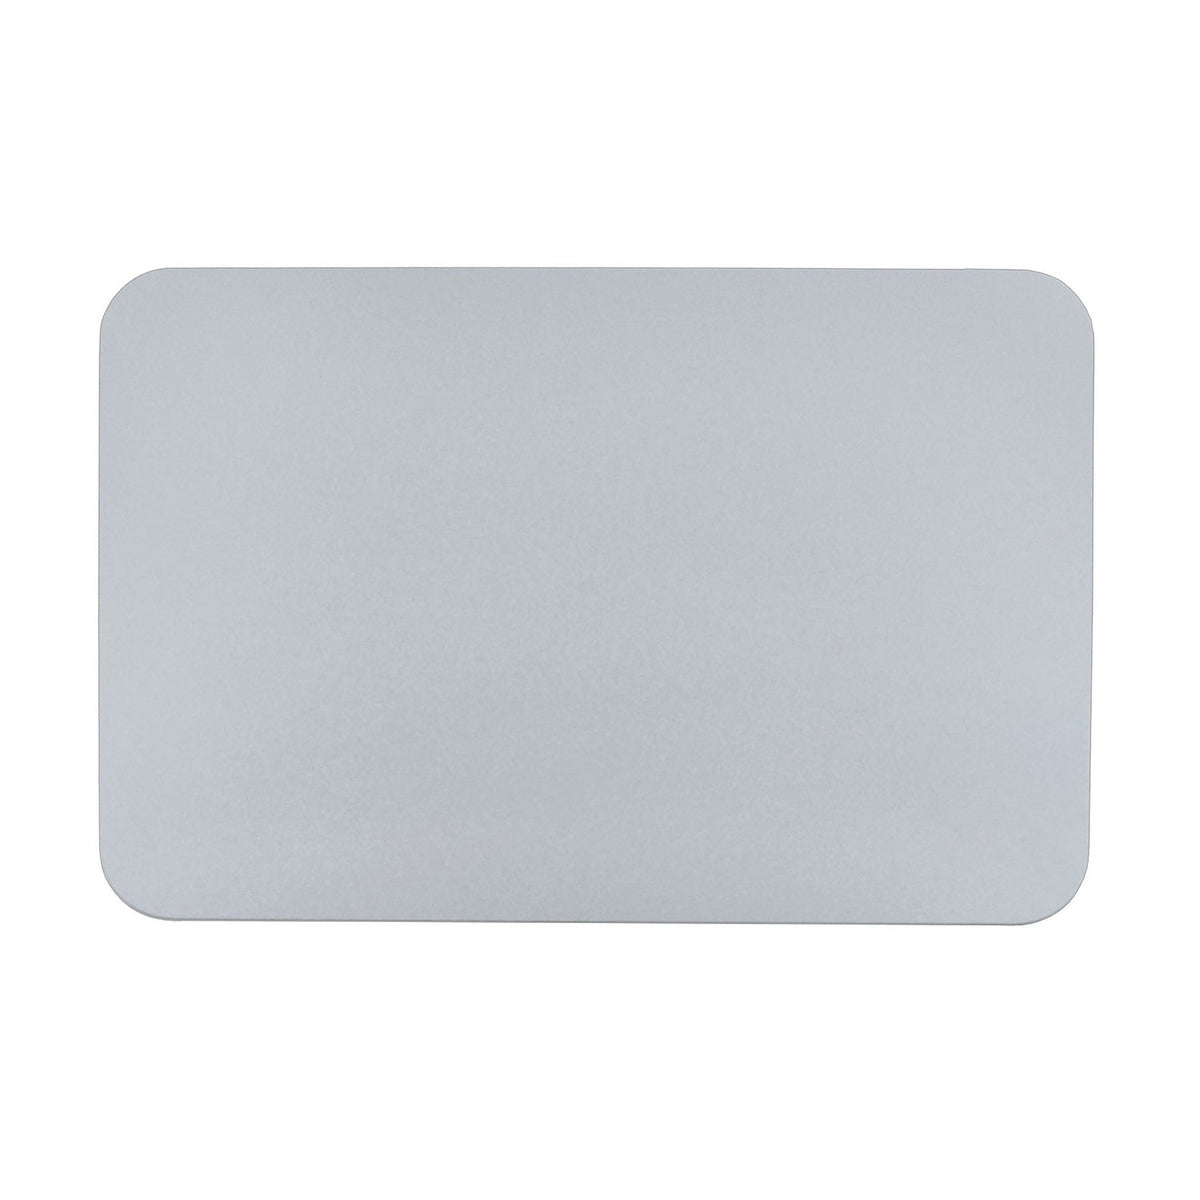 RAM DOOR COVER  FOR IMAC 27" A1419 (LATE 2013, MID 2017)